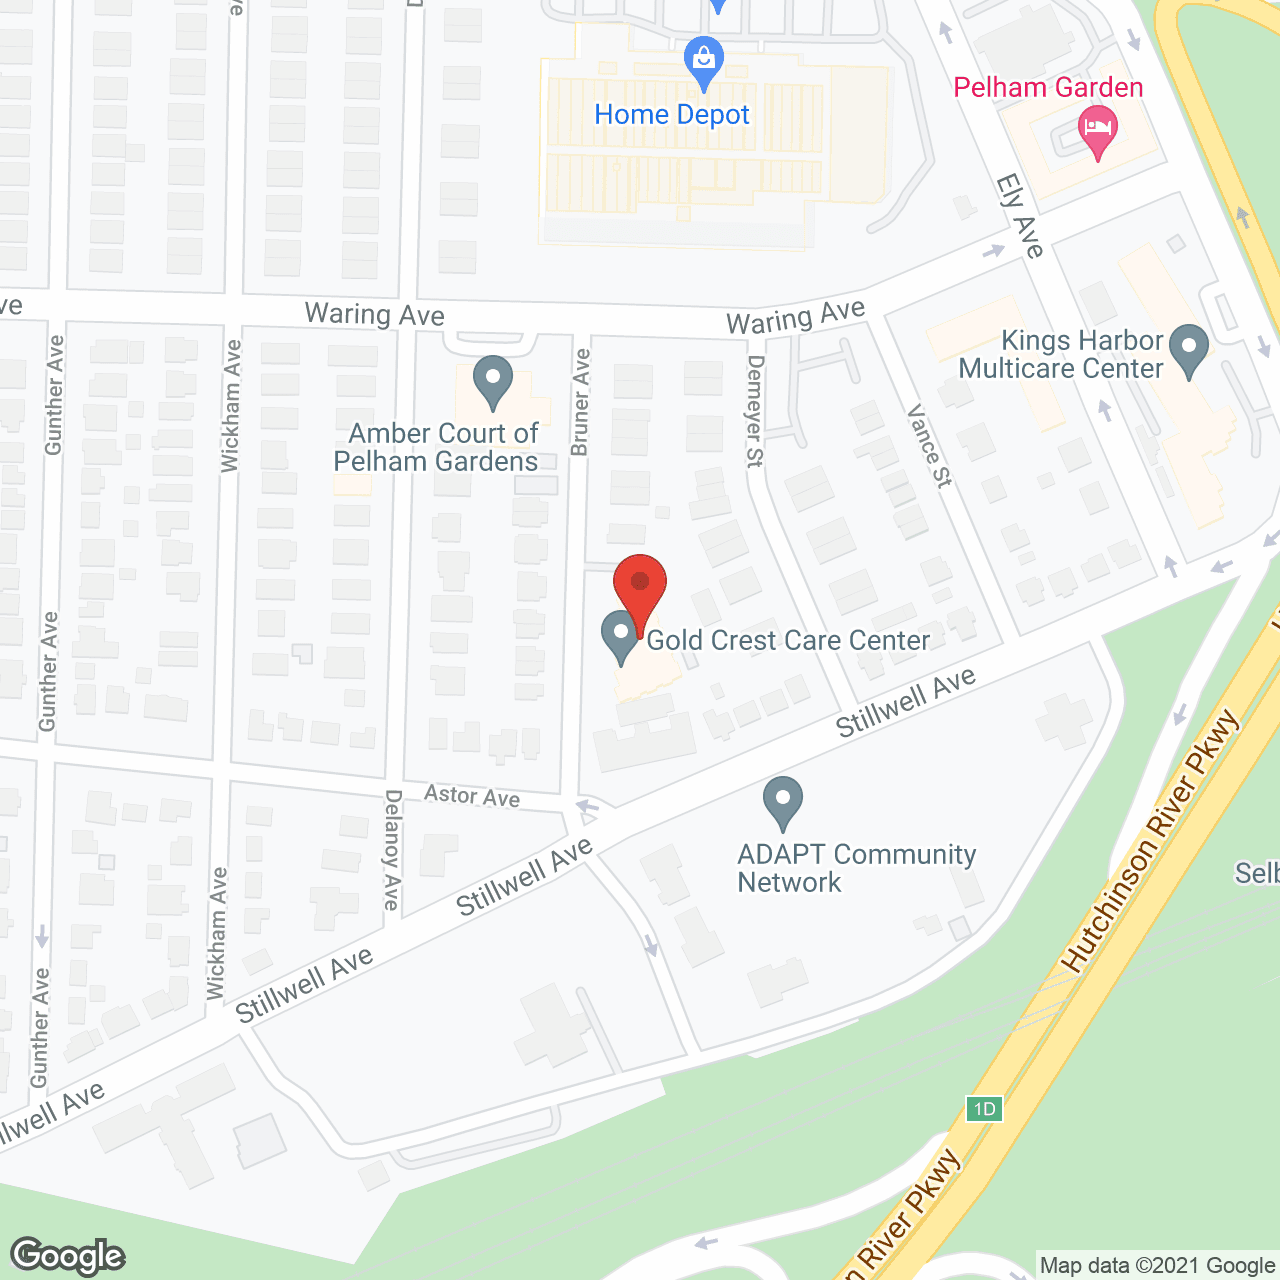 Gold Crest Care Ctr in google map